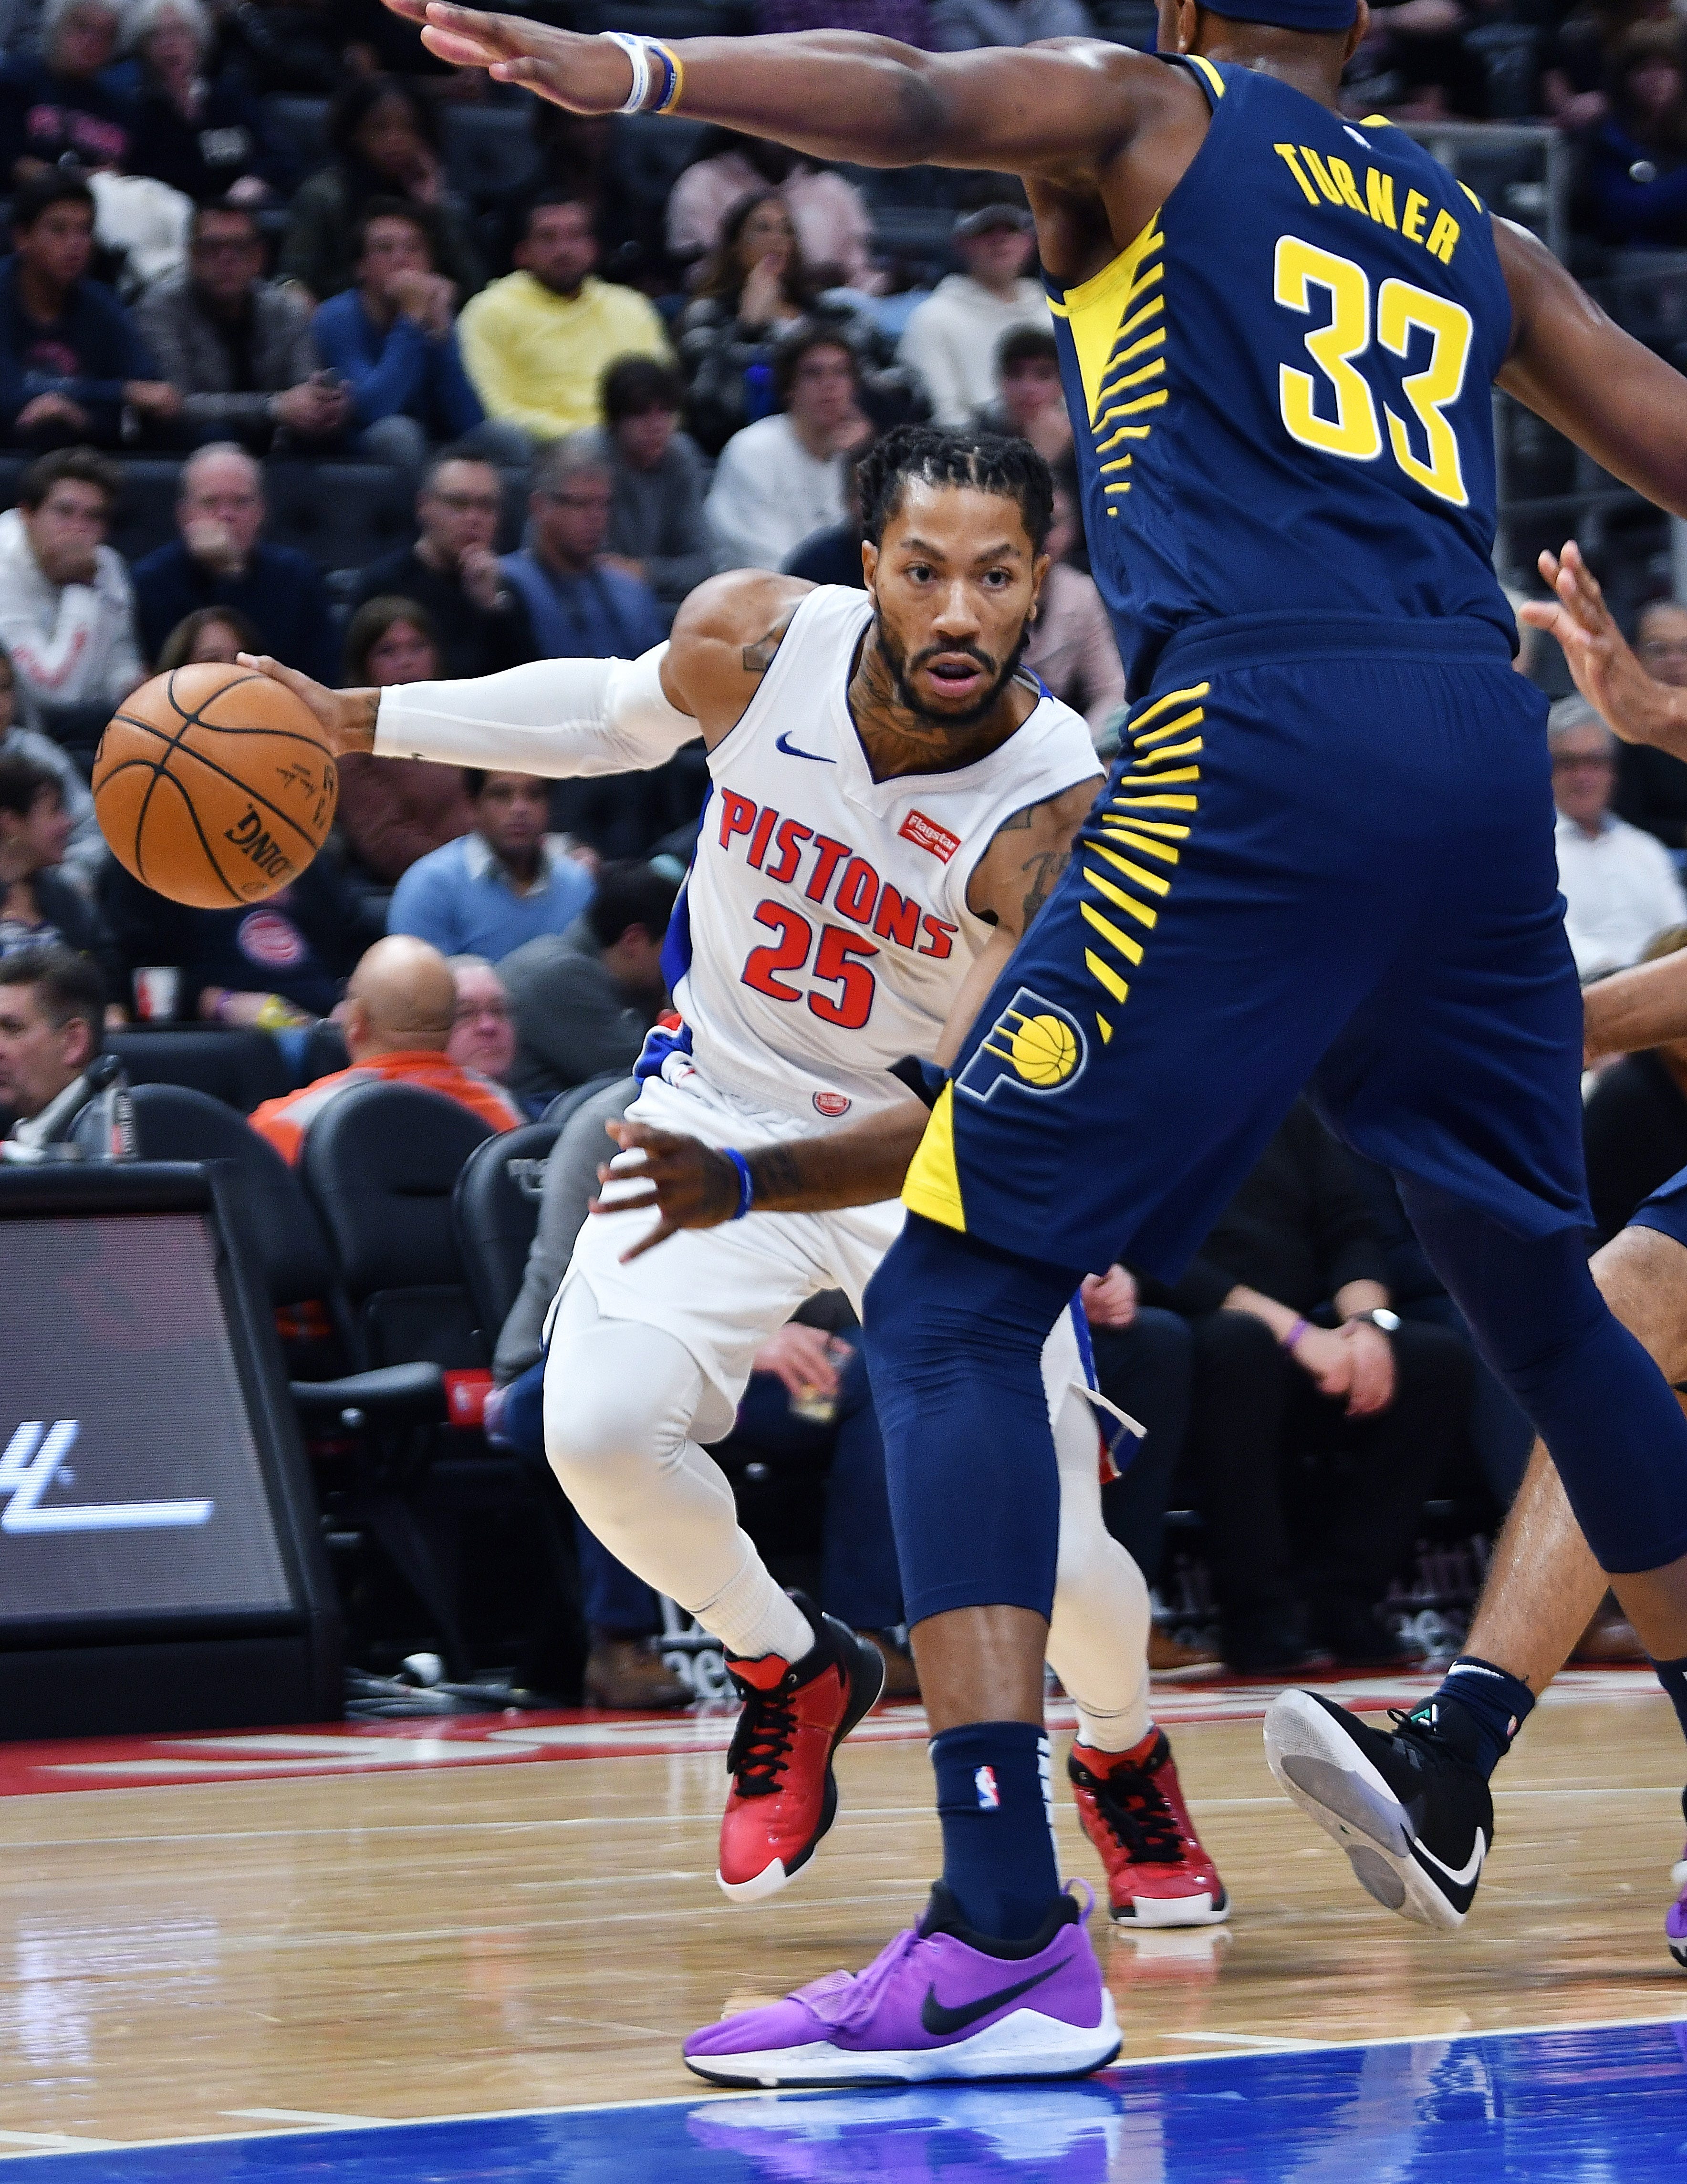 Pistons' Derrick Rose drives around Pacers' Myles Turner in the second quarter.